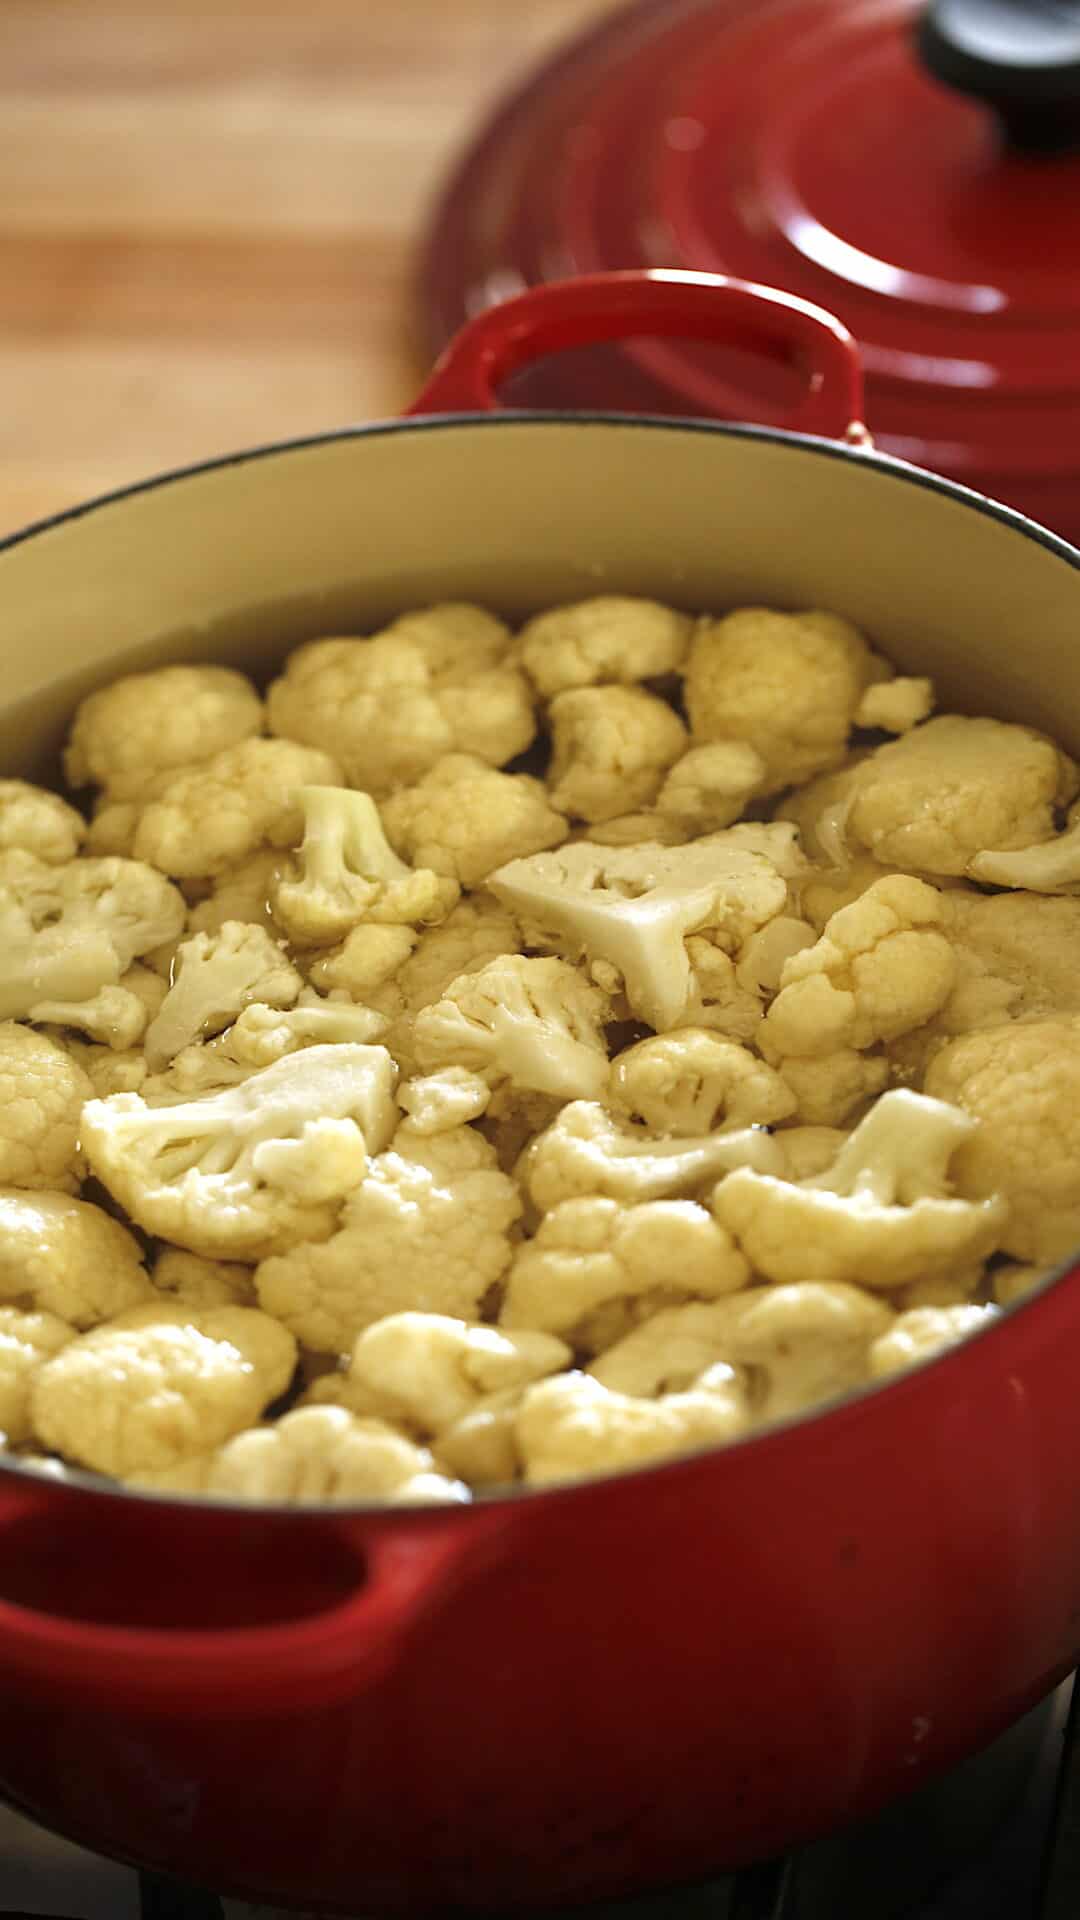 Cauliflower boiling in pot of water